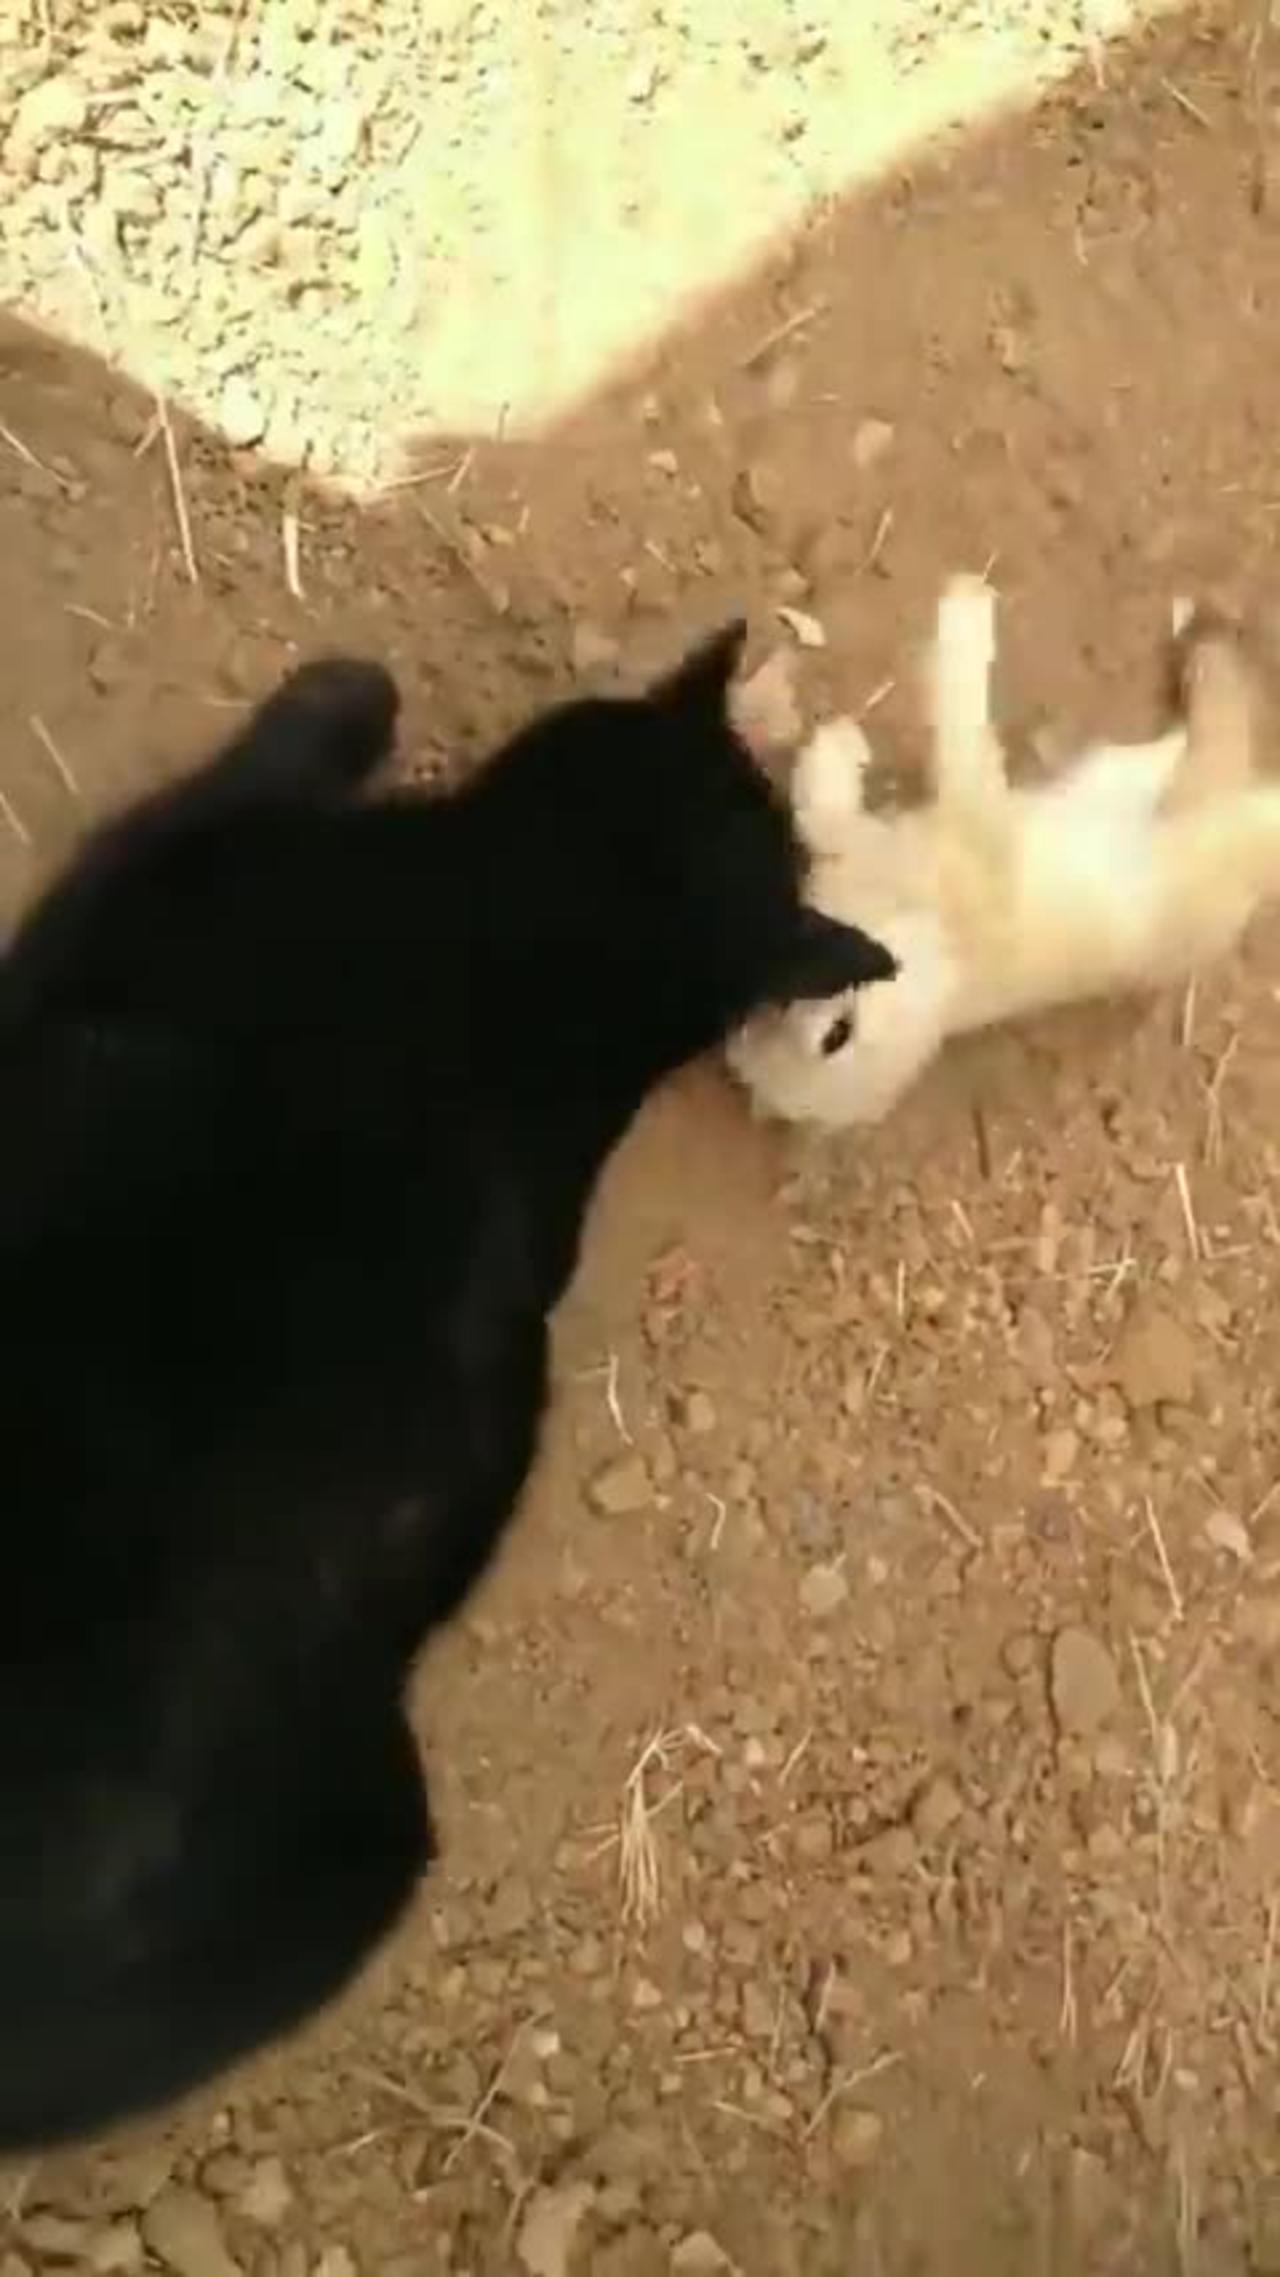 The Desert Fox was delighted to meet the cat